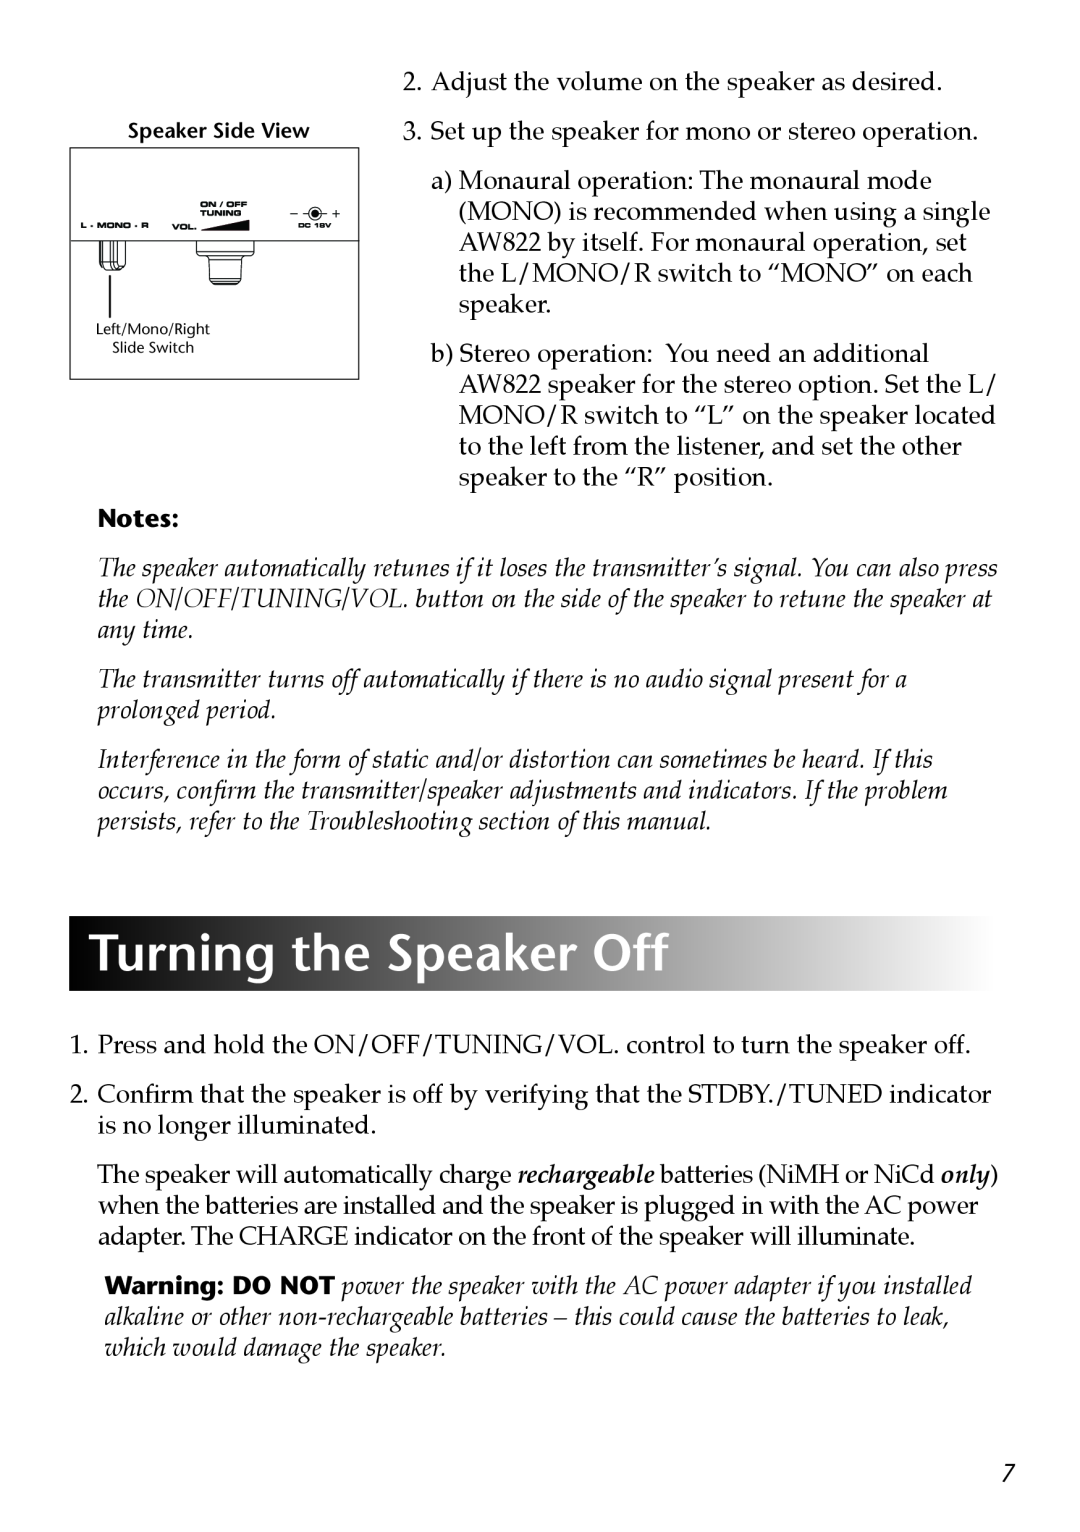 Acoustic Research AW822 operation manual Turning the Speaker Off, Notes 